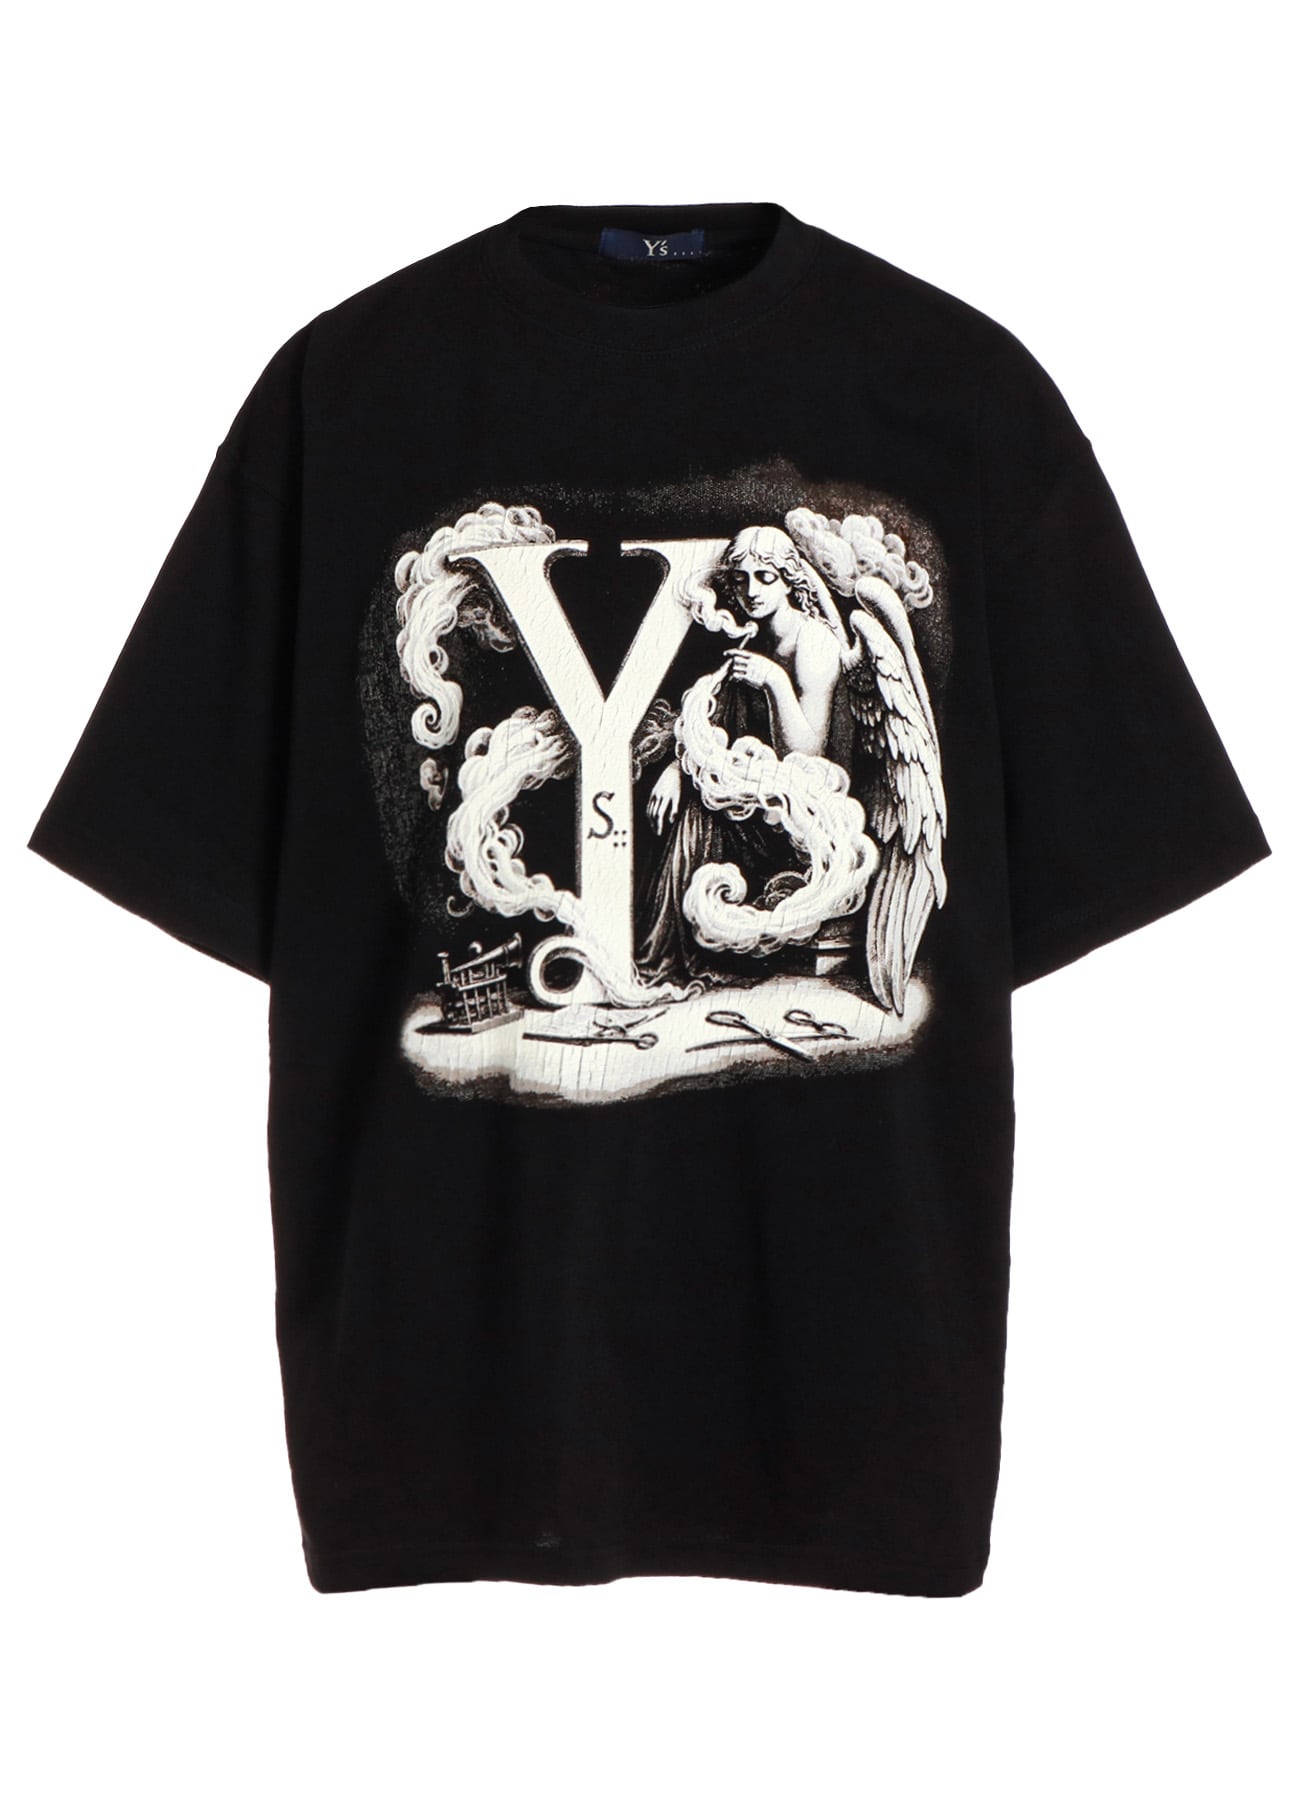 【7/17 12:00(JST) Release】ANGEL PRINTED T-SHIRT A